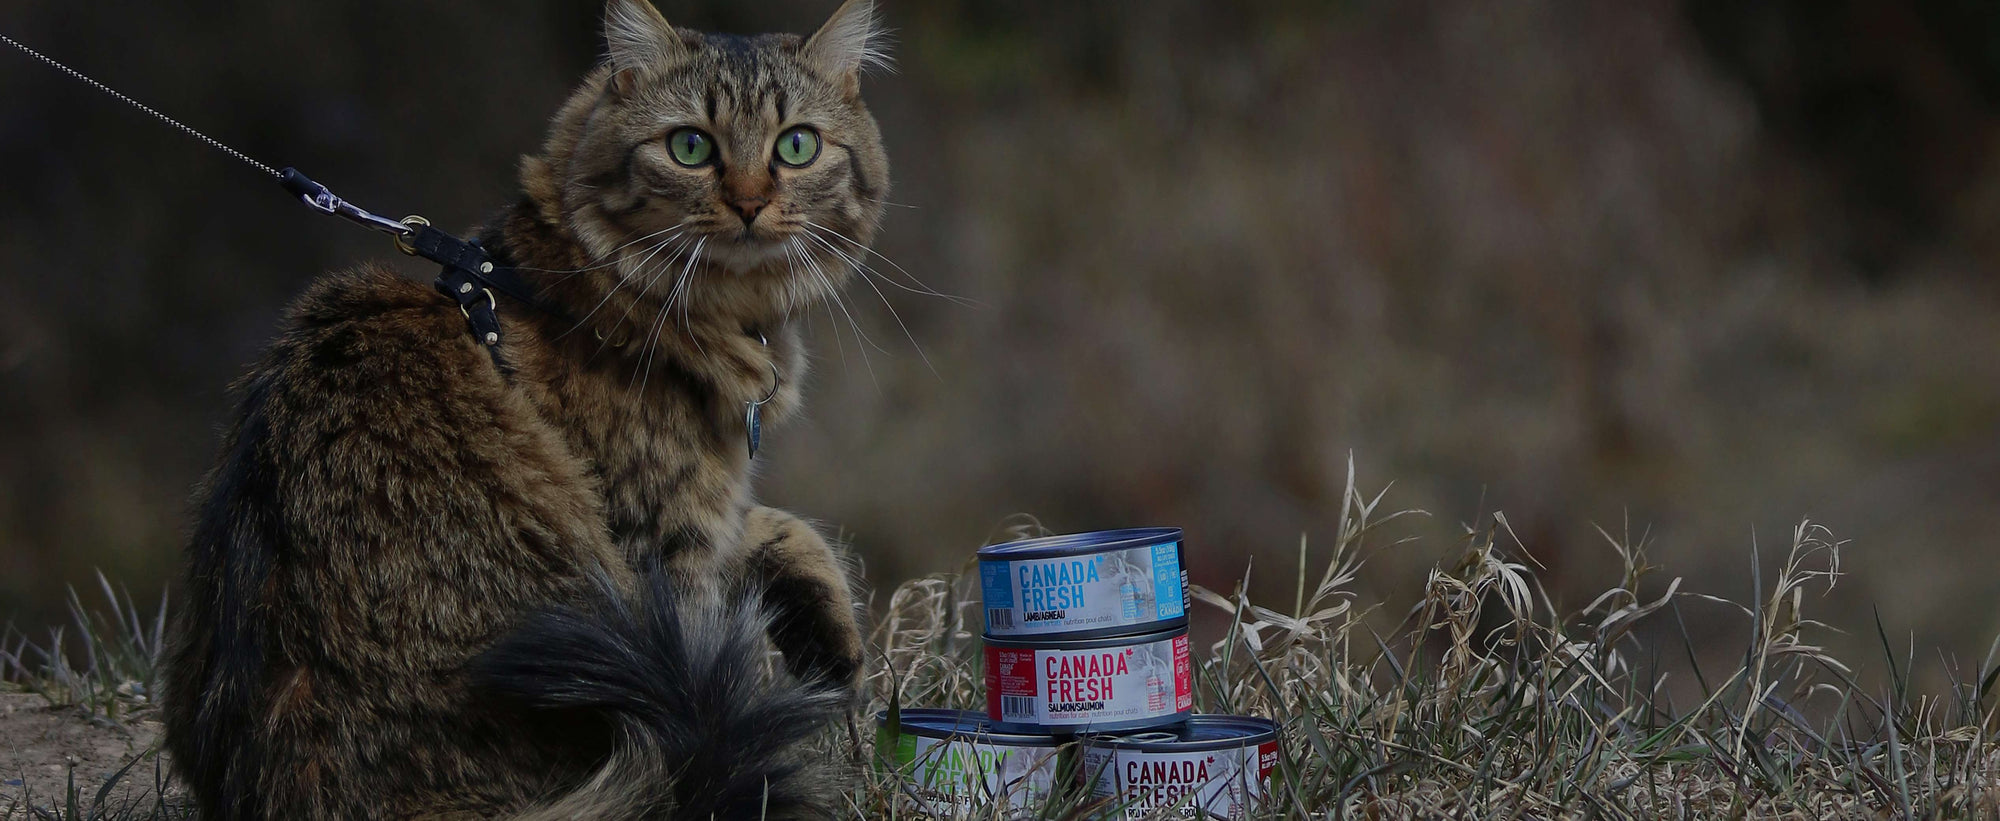 Ginger cat sitting in wild grass besides towering 5.5 oz cans of different variants of Canada Fresh